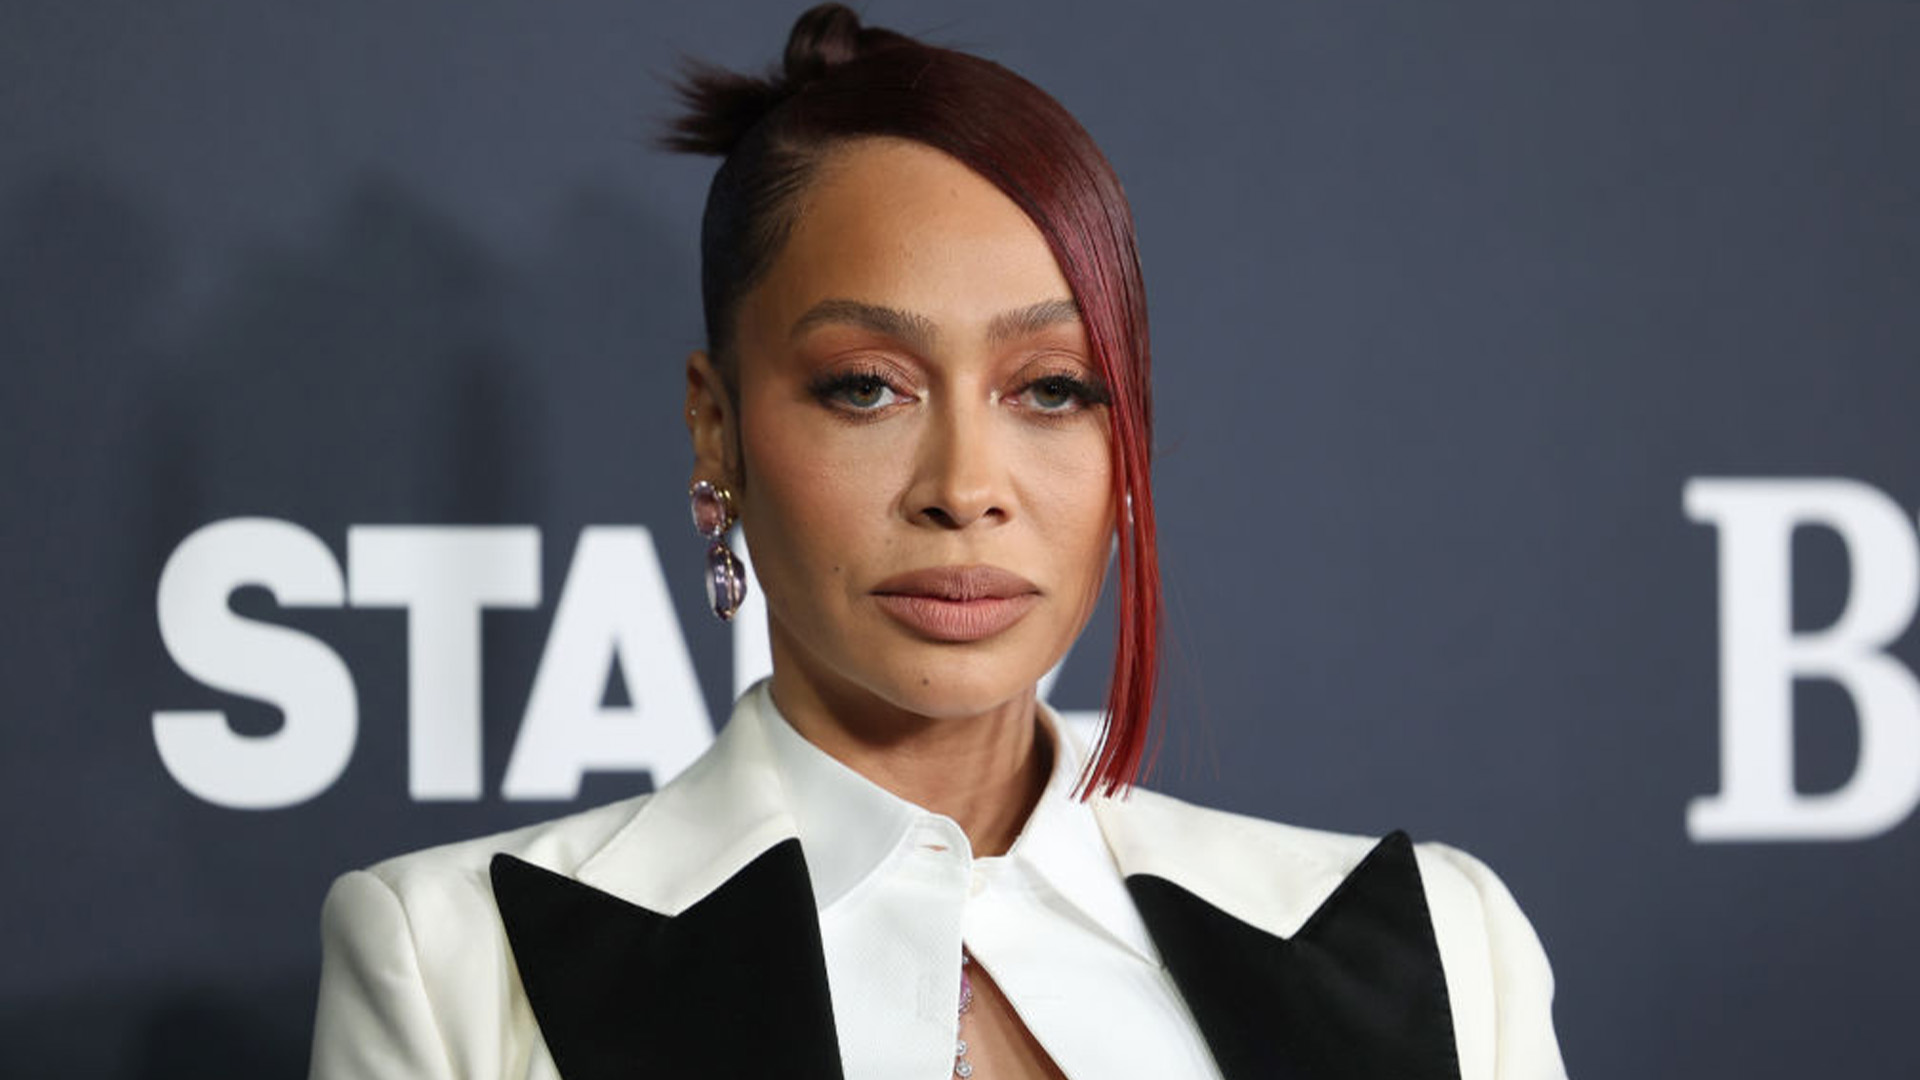 La La Anthony Shares Her Program For Young Incarcerated Men Helped Someone Land A Full Scholarship To Columbia University Within A Year A Of Being Released From Prison